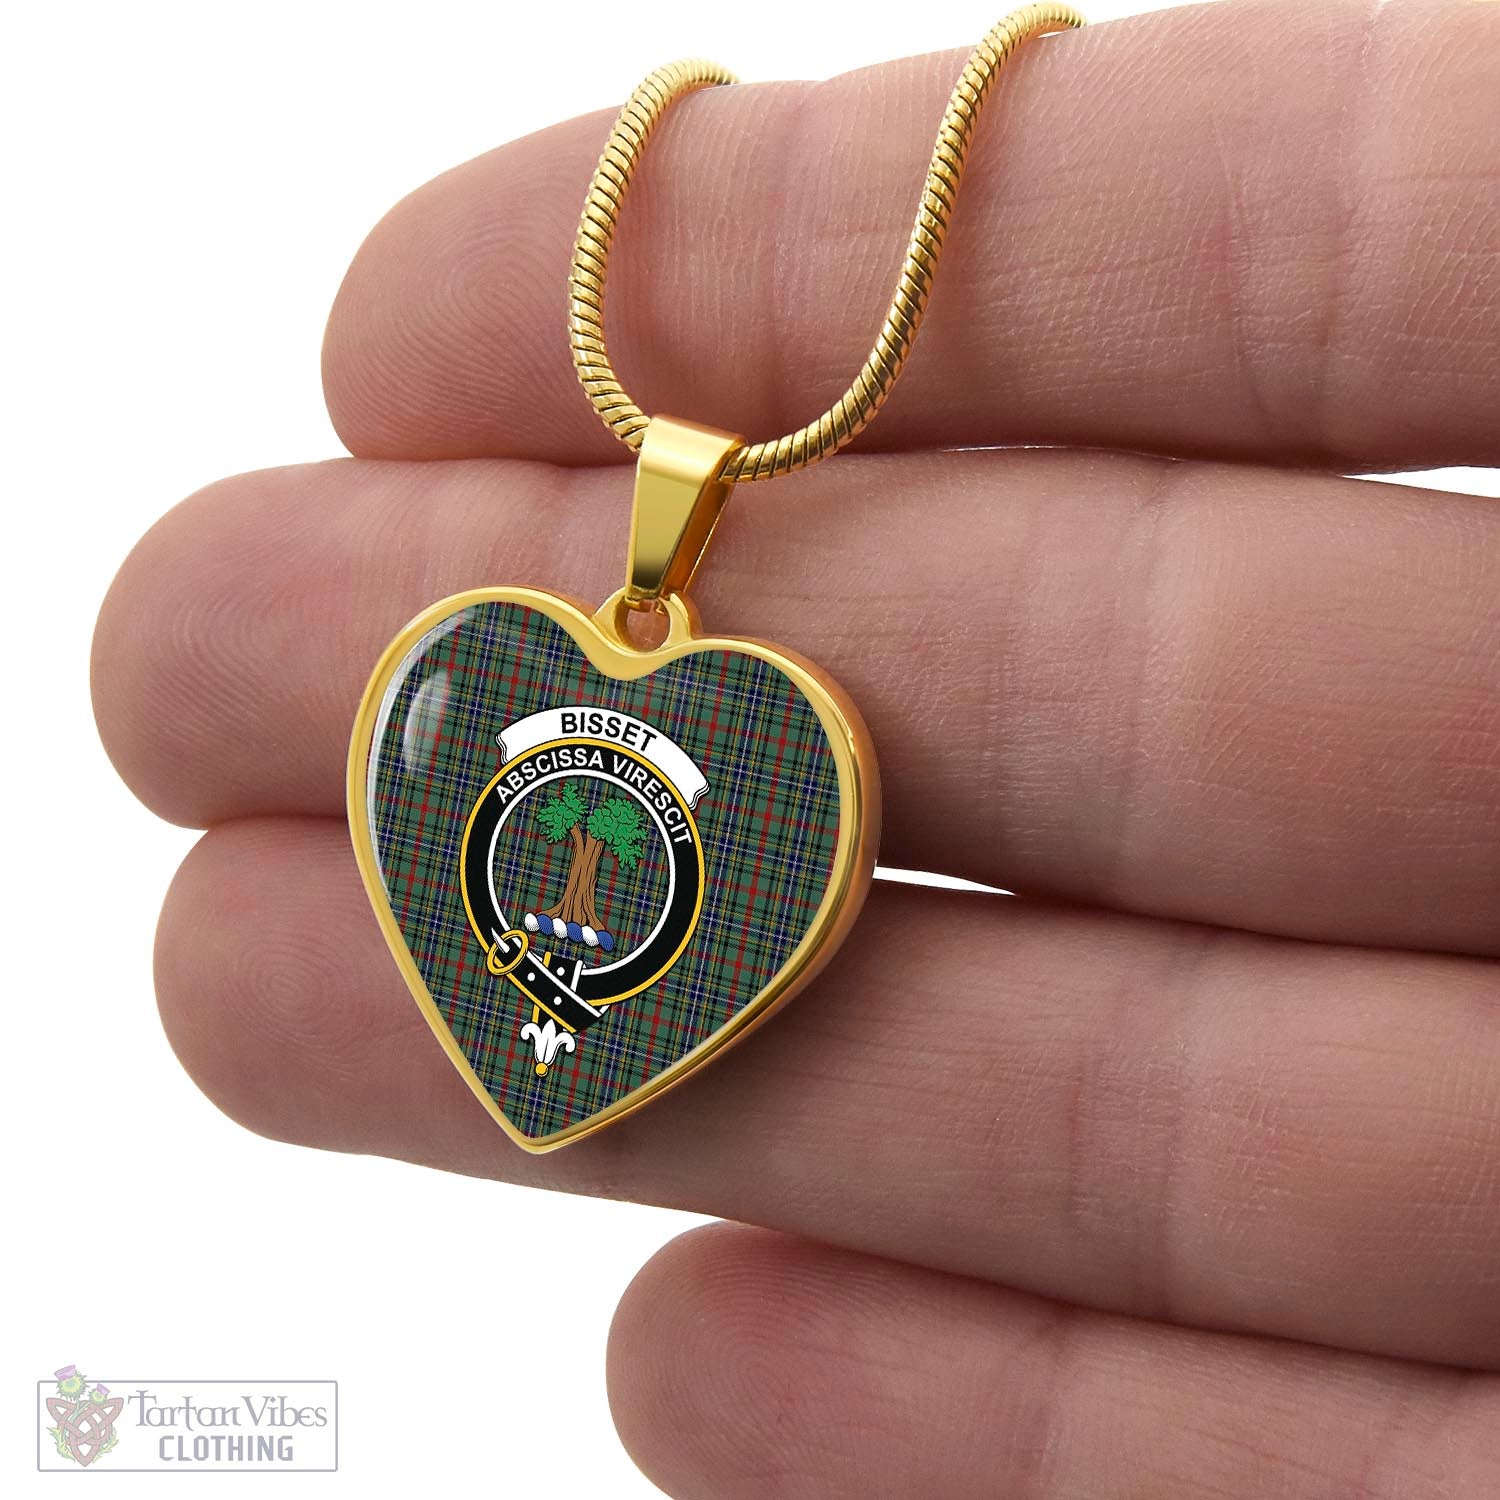 Tartan Vibes Clothing Bisset Tartan Heart Necklace with Family Crest